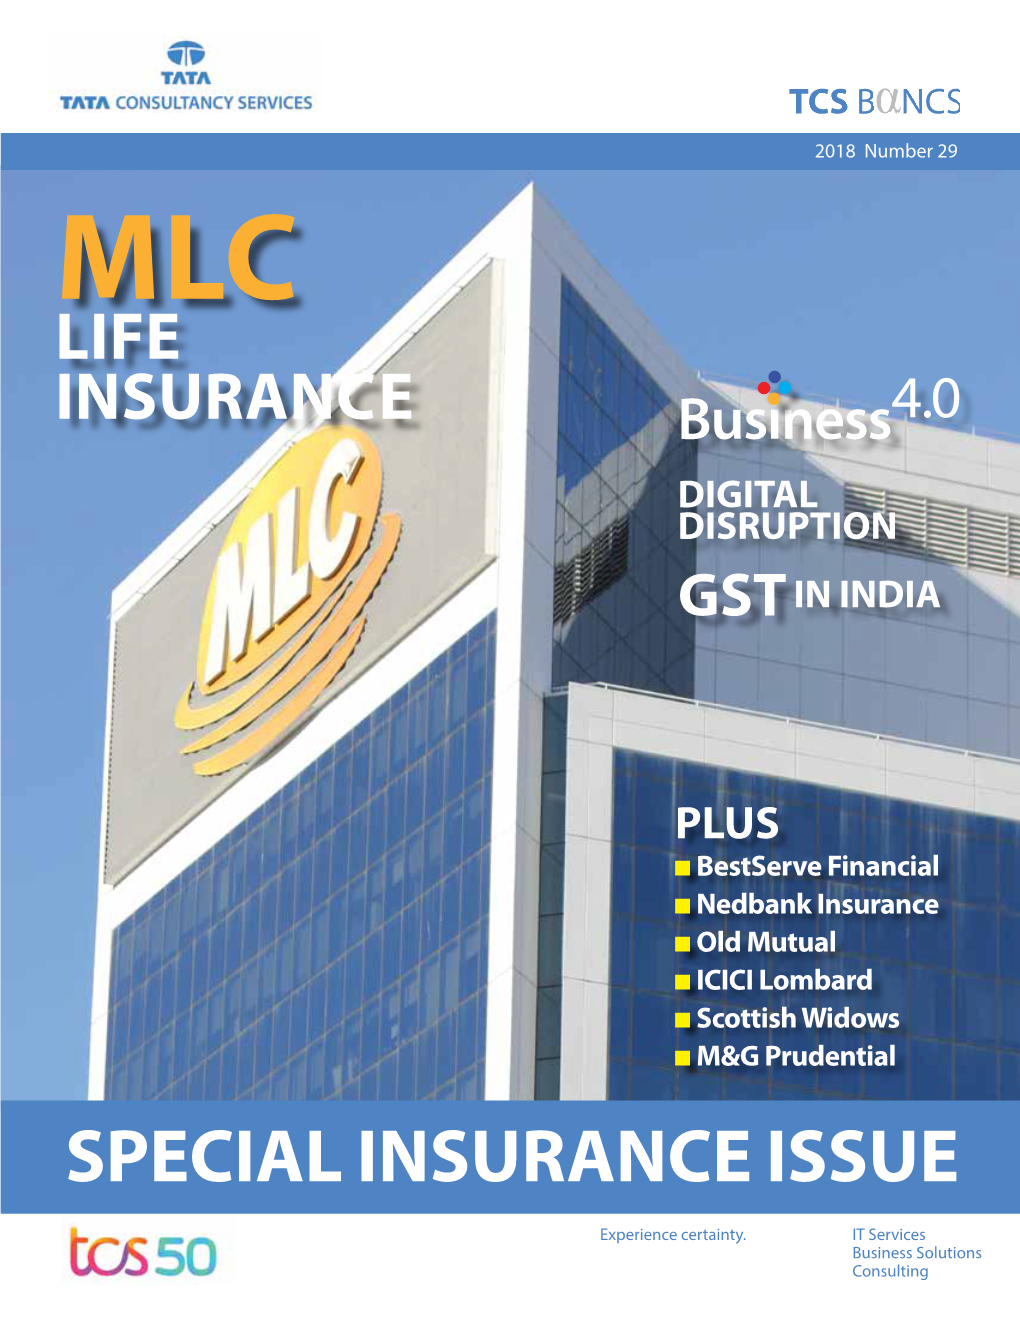 LIFE INSURANCE Business4.0 DIGITAL DISRUPTION GST in INDIA